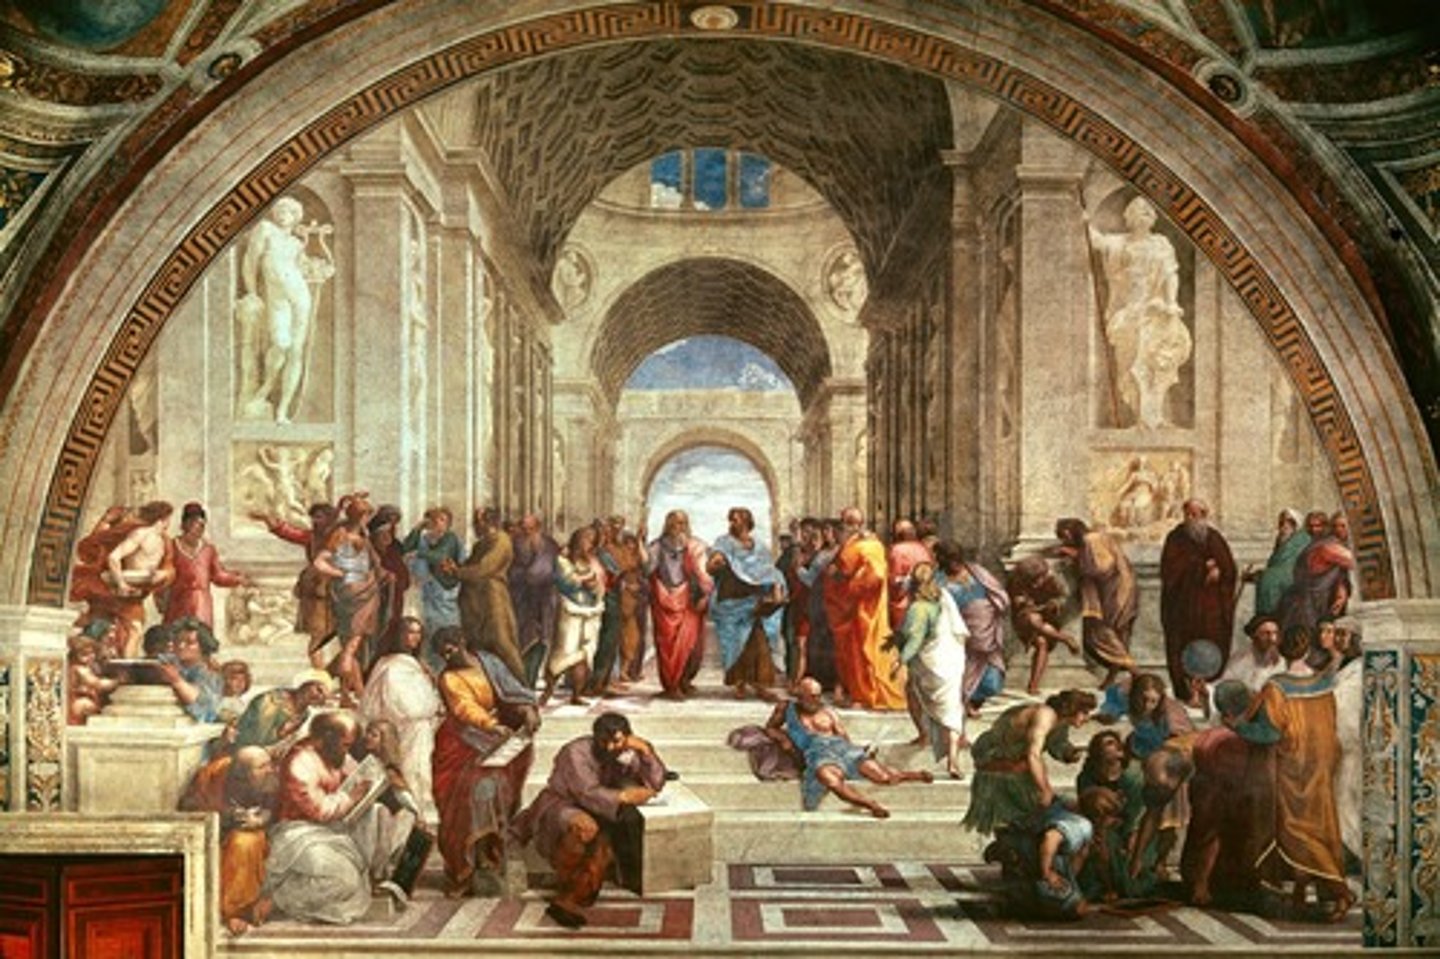 <p>(1483-1520) Italian Renaissance painter; he painted frescos, his most famous being The School of Athens.</p>